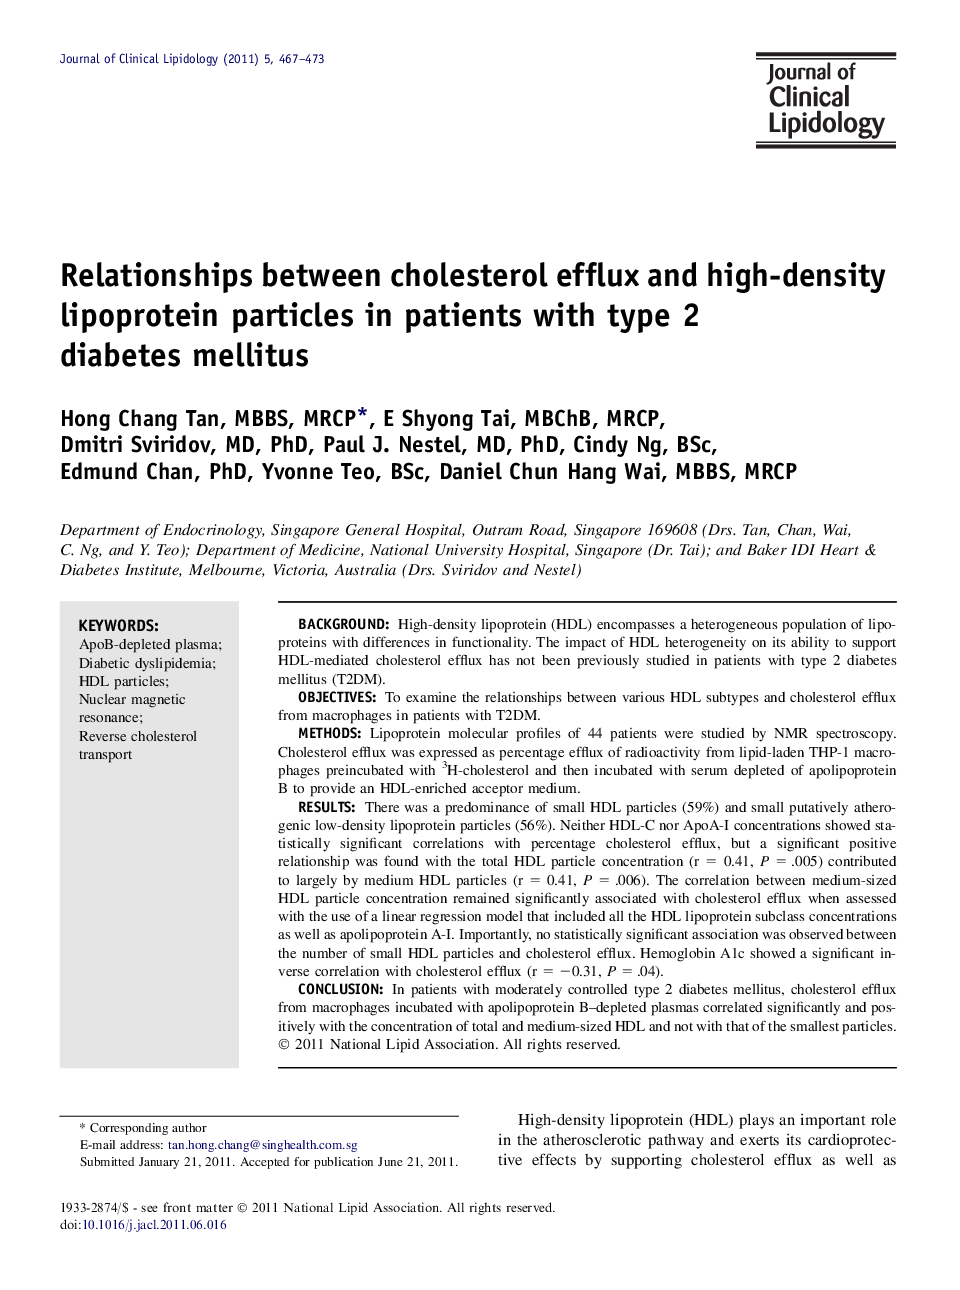 Relationships between cholesterol efflux and high-density lipoprotein particles in patients with type 2 diabetes mellitus